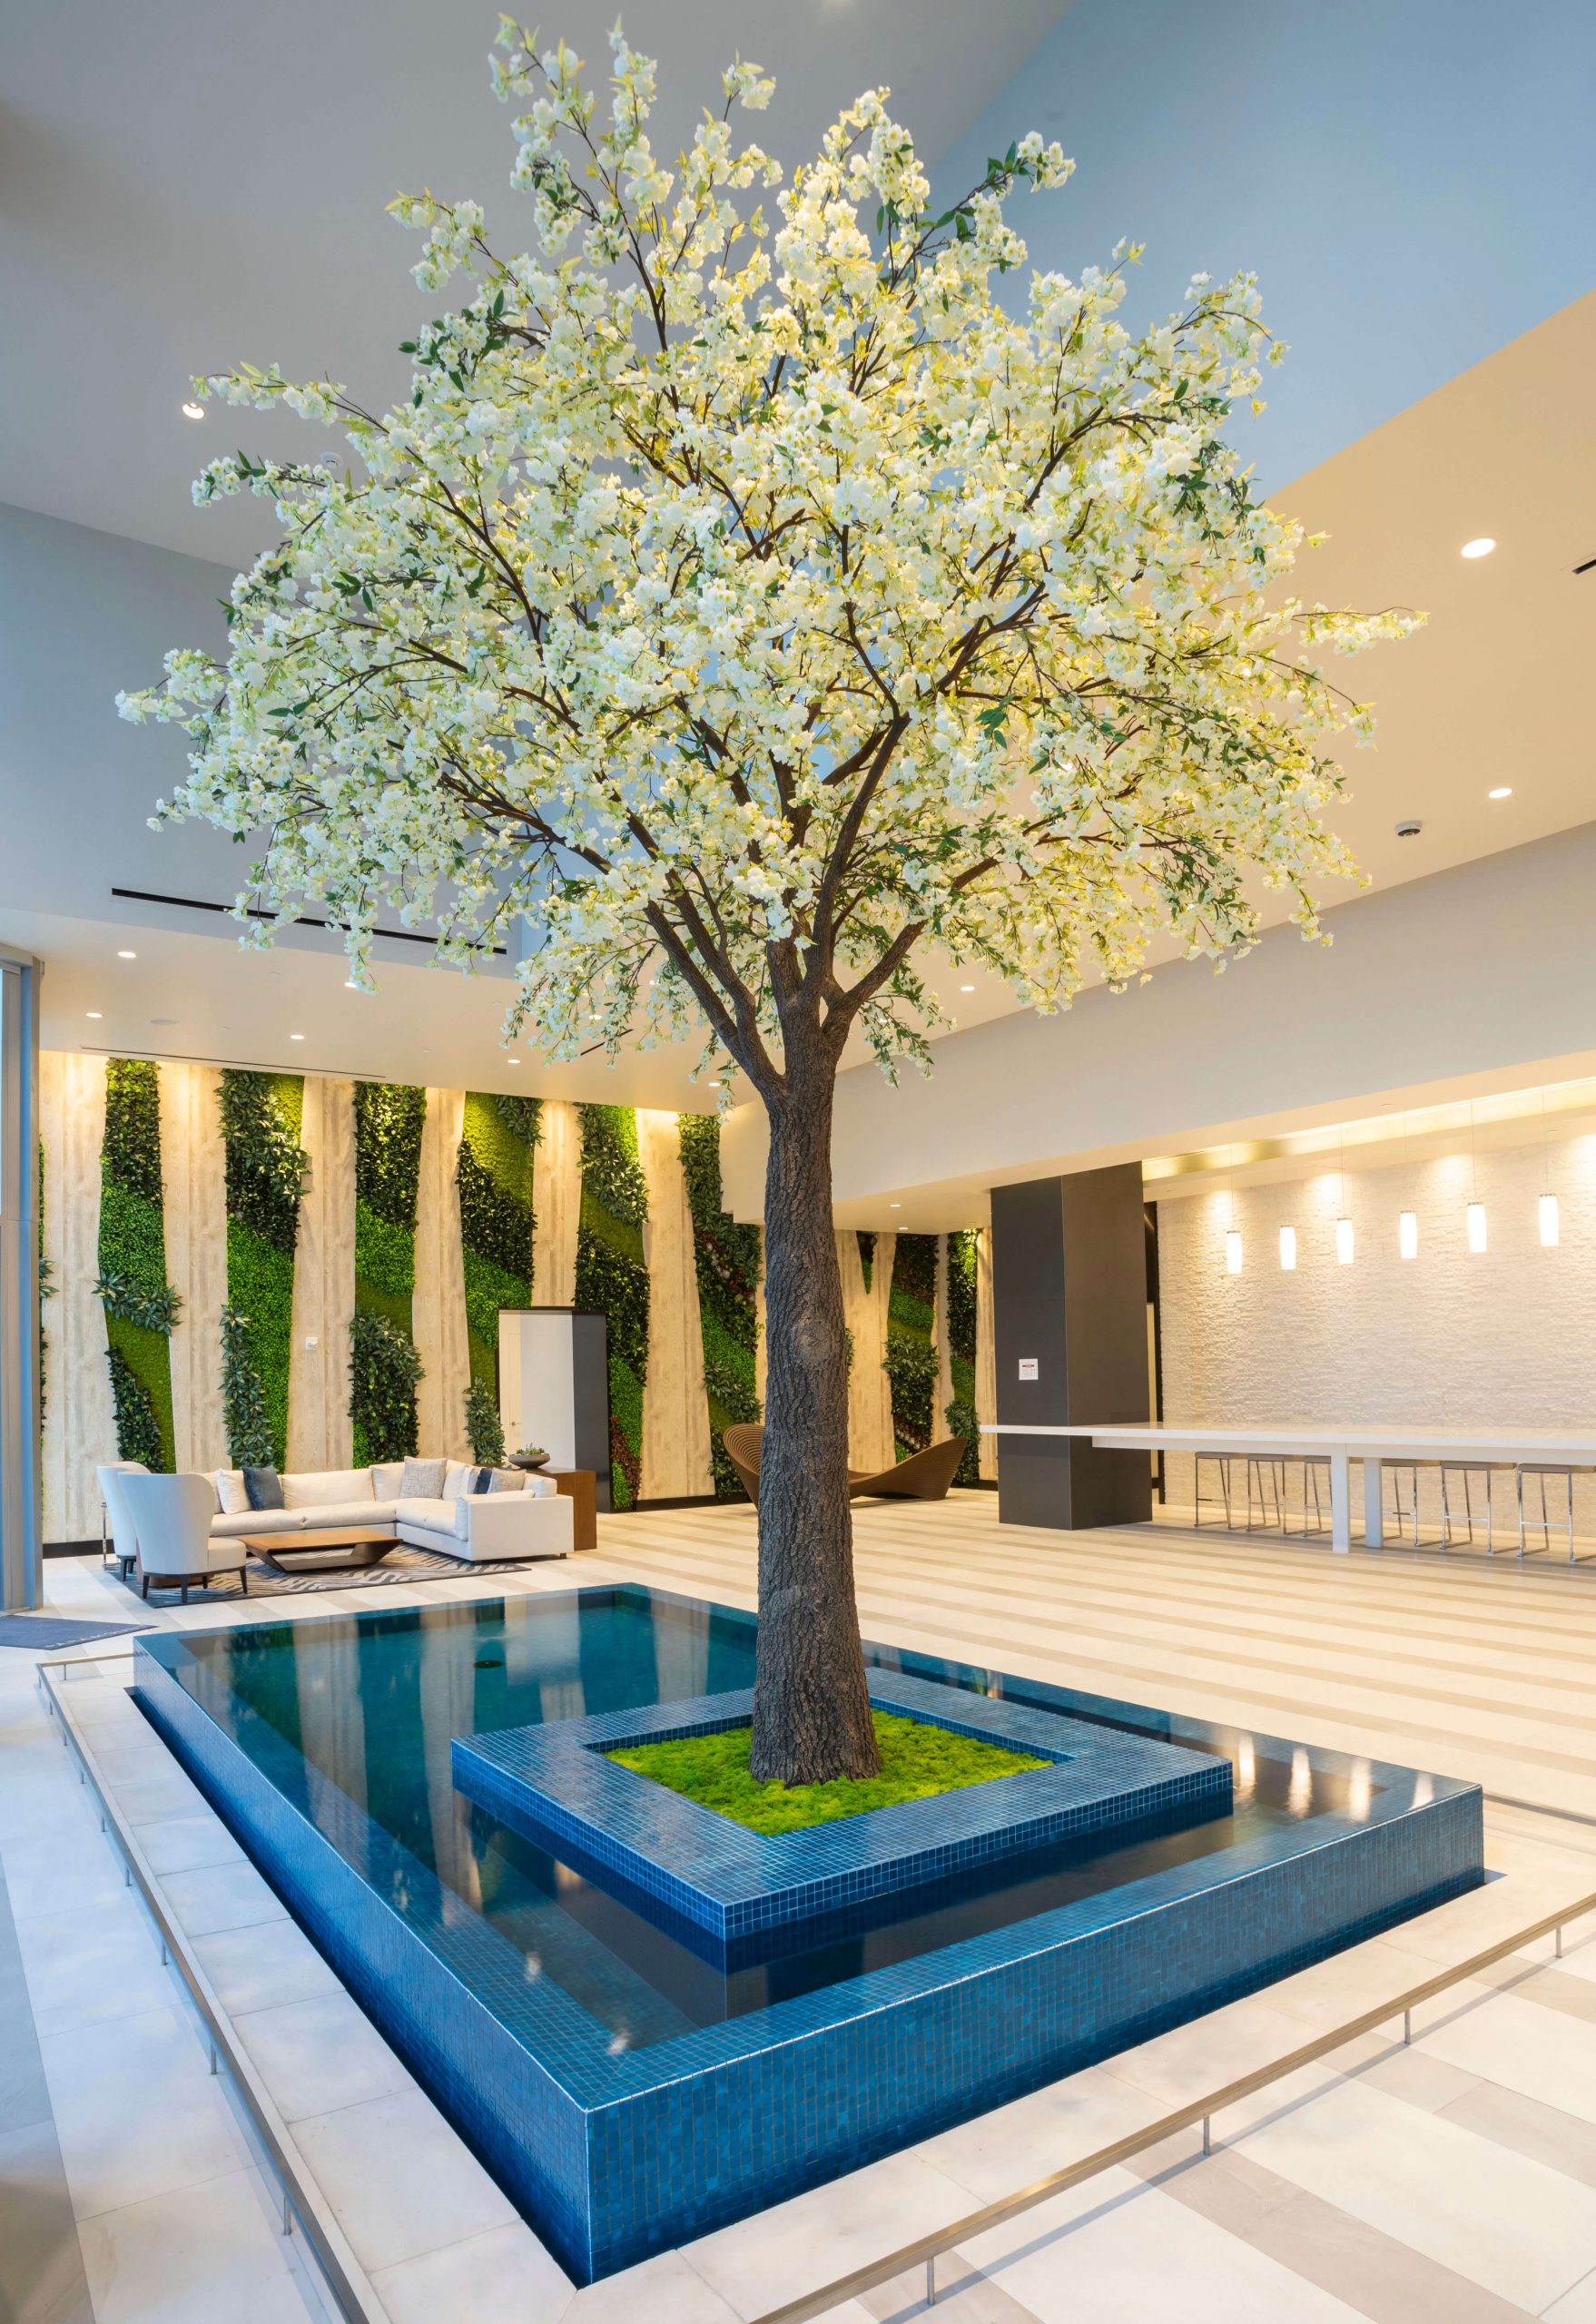 Fabricated Cherry Blossom Tree in infinity edge reflecting pool with Vertical Garden in background 1